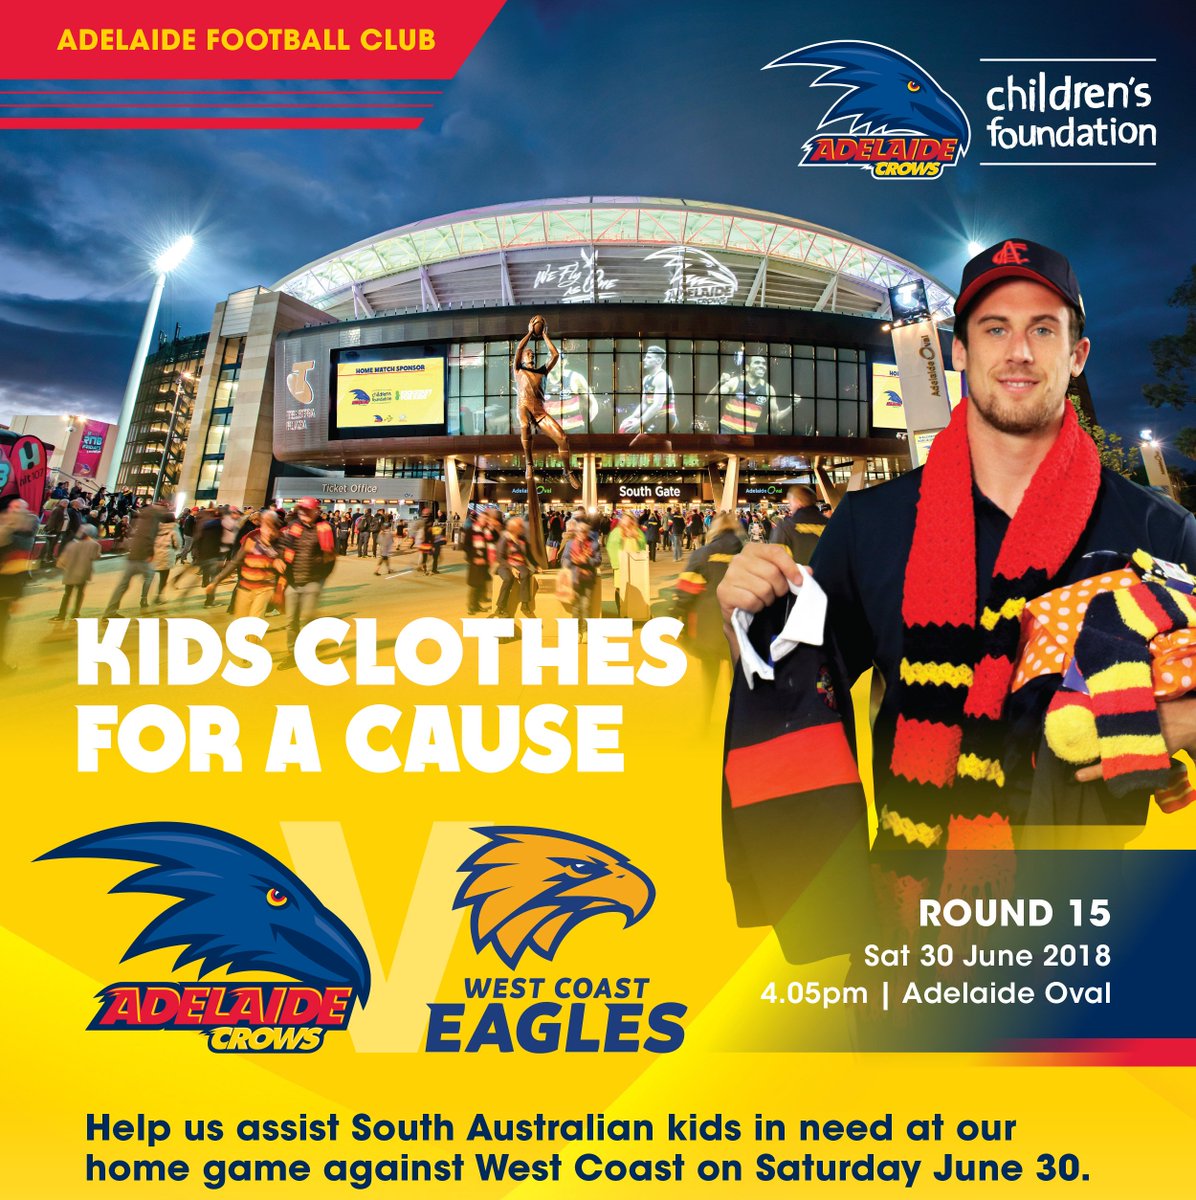 We'd love your help in providing clothes to kids in need at our next Camp KickStart! Thanks to the @CrowsFoundation, we'll be collecting new clothes for them at this Saturday's game at @TheAdelaideOval. Thank you so much for your support. We know the kids will be so grateful :)